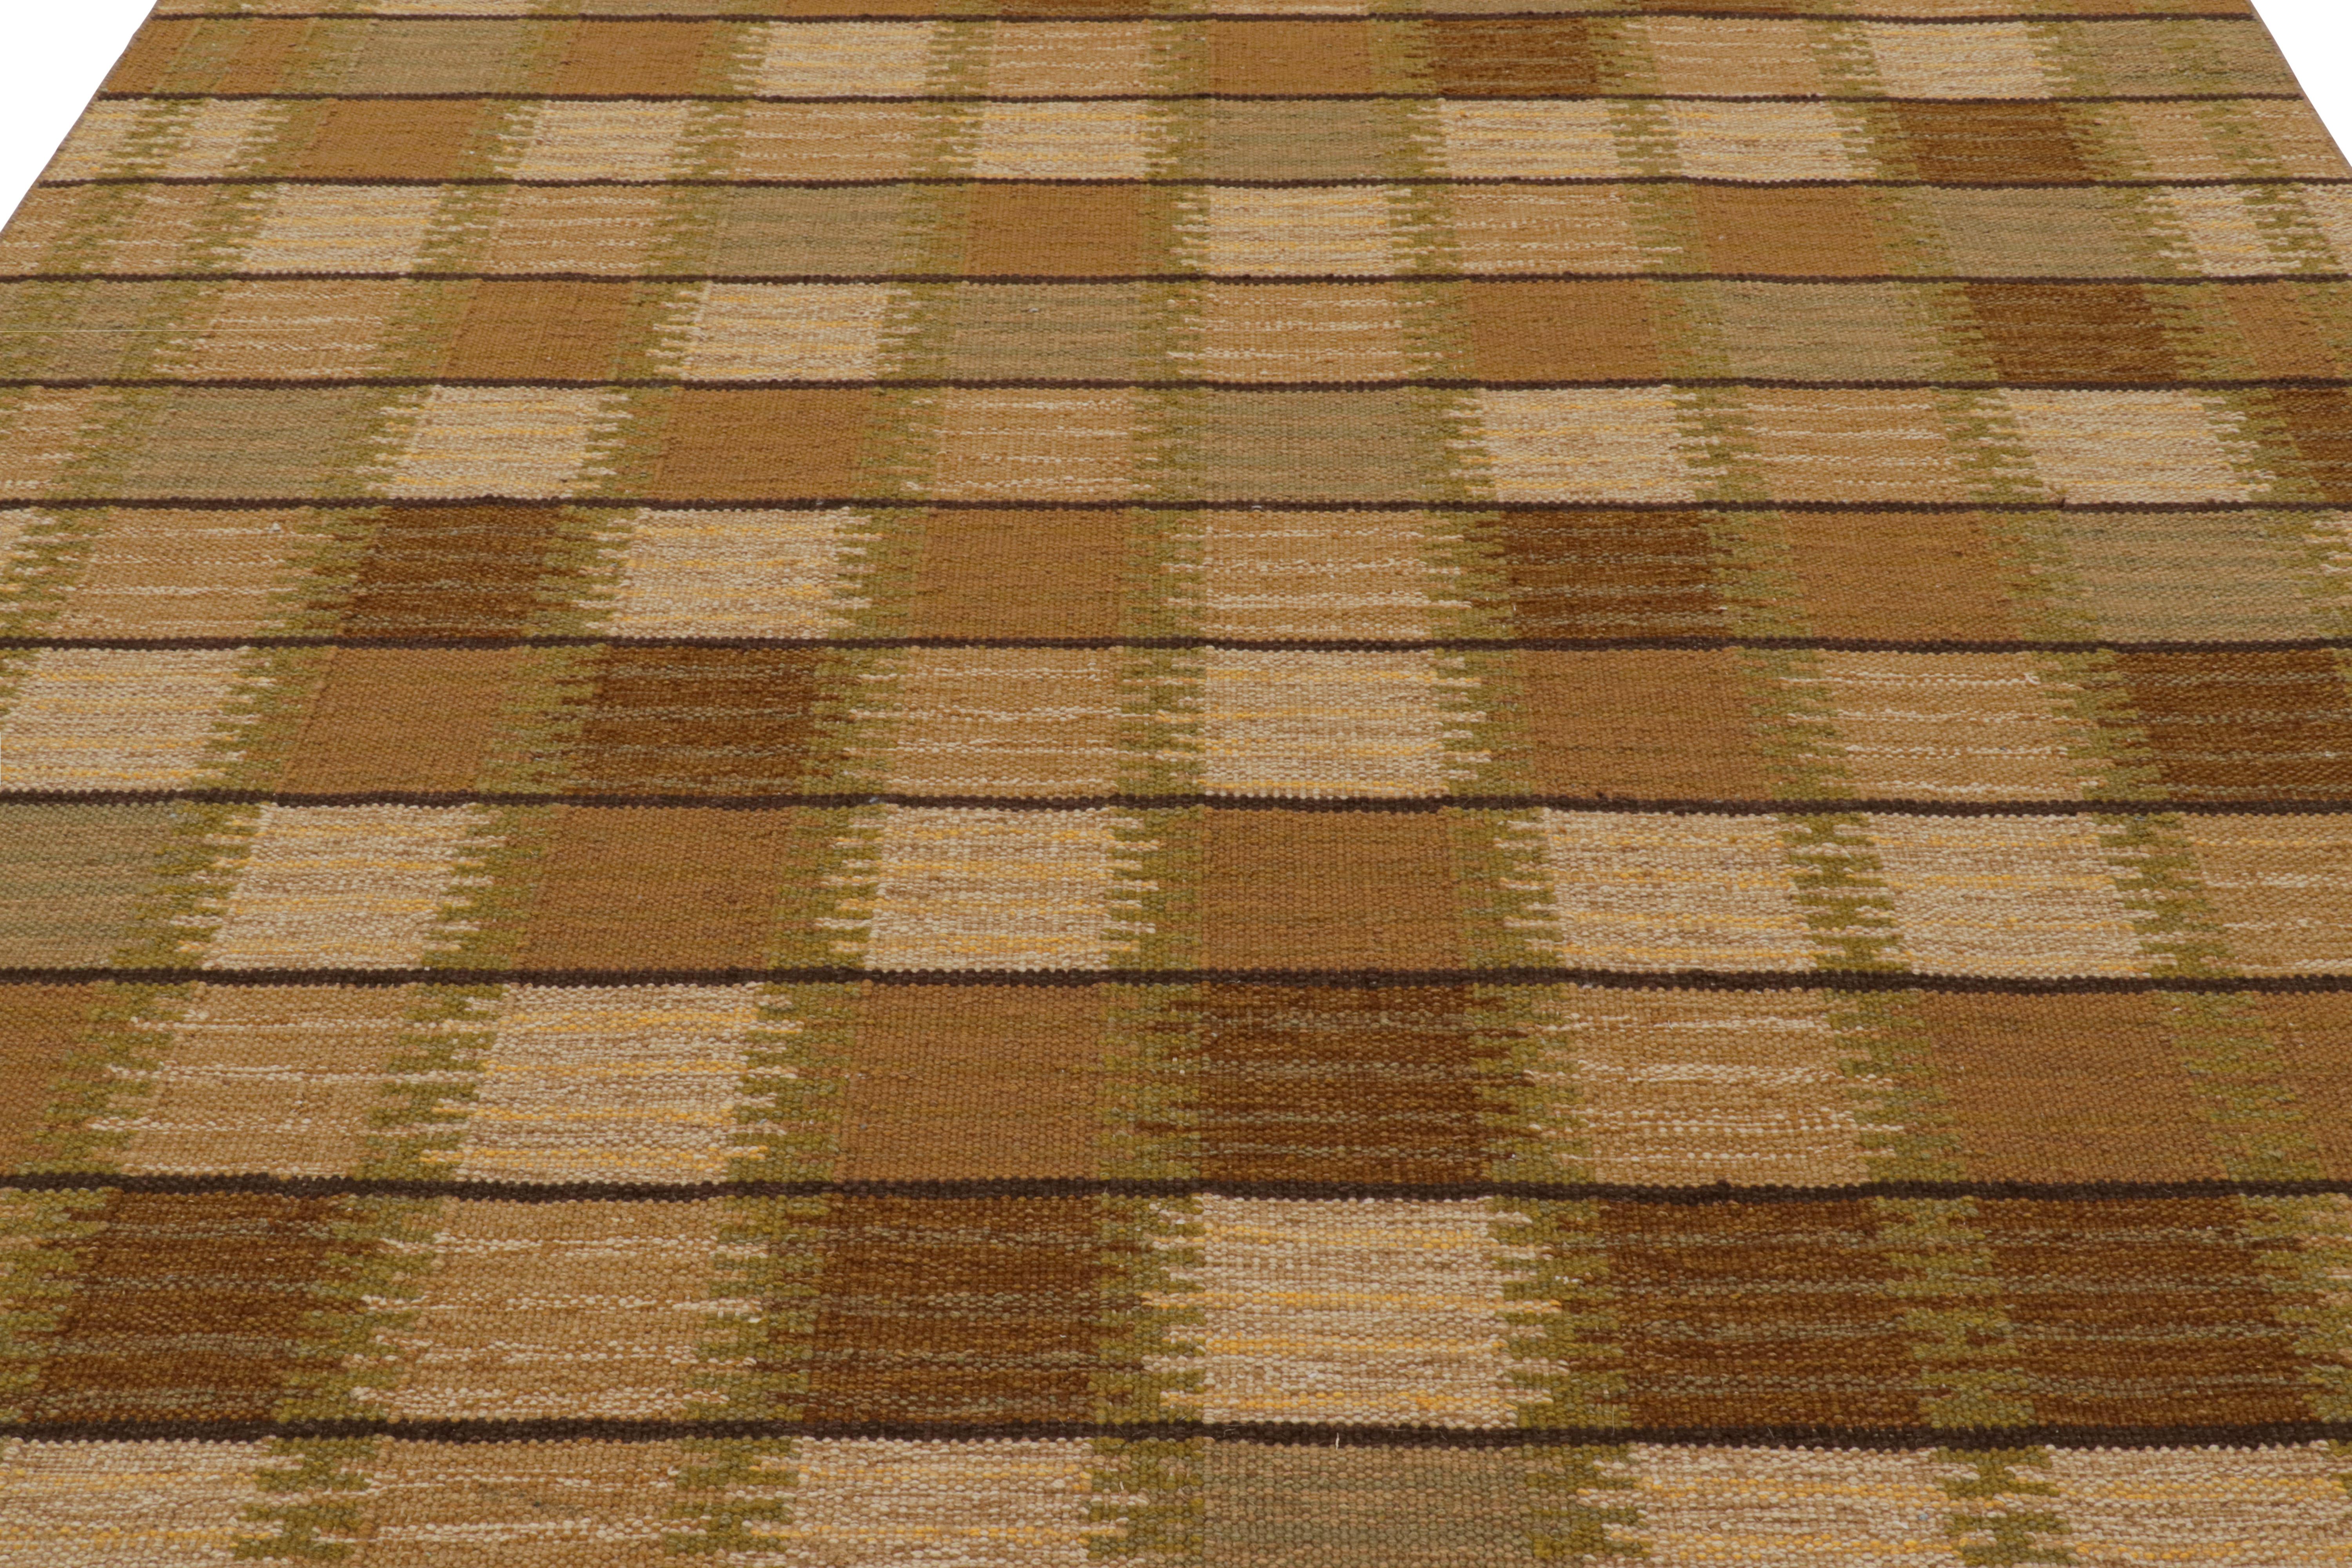 Hand-Woven Rug & Kilim’s Scandinavian Style Rug with Brown and Beige Geometric Patterns  For Sale